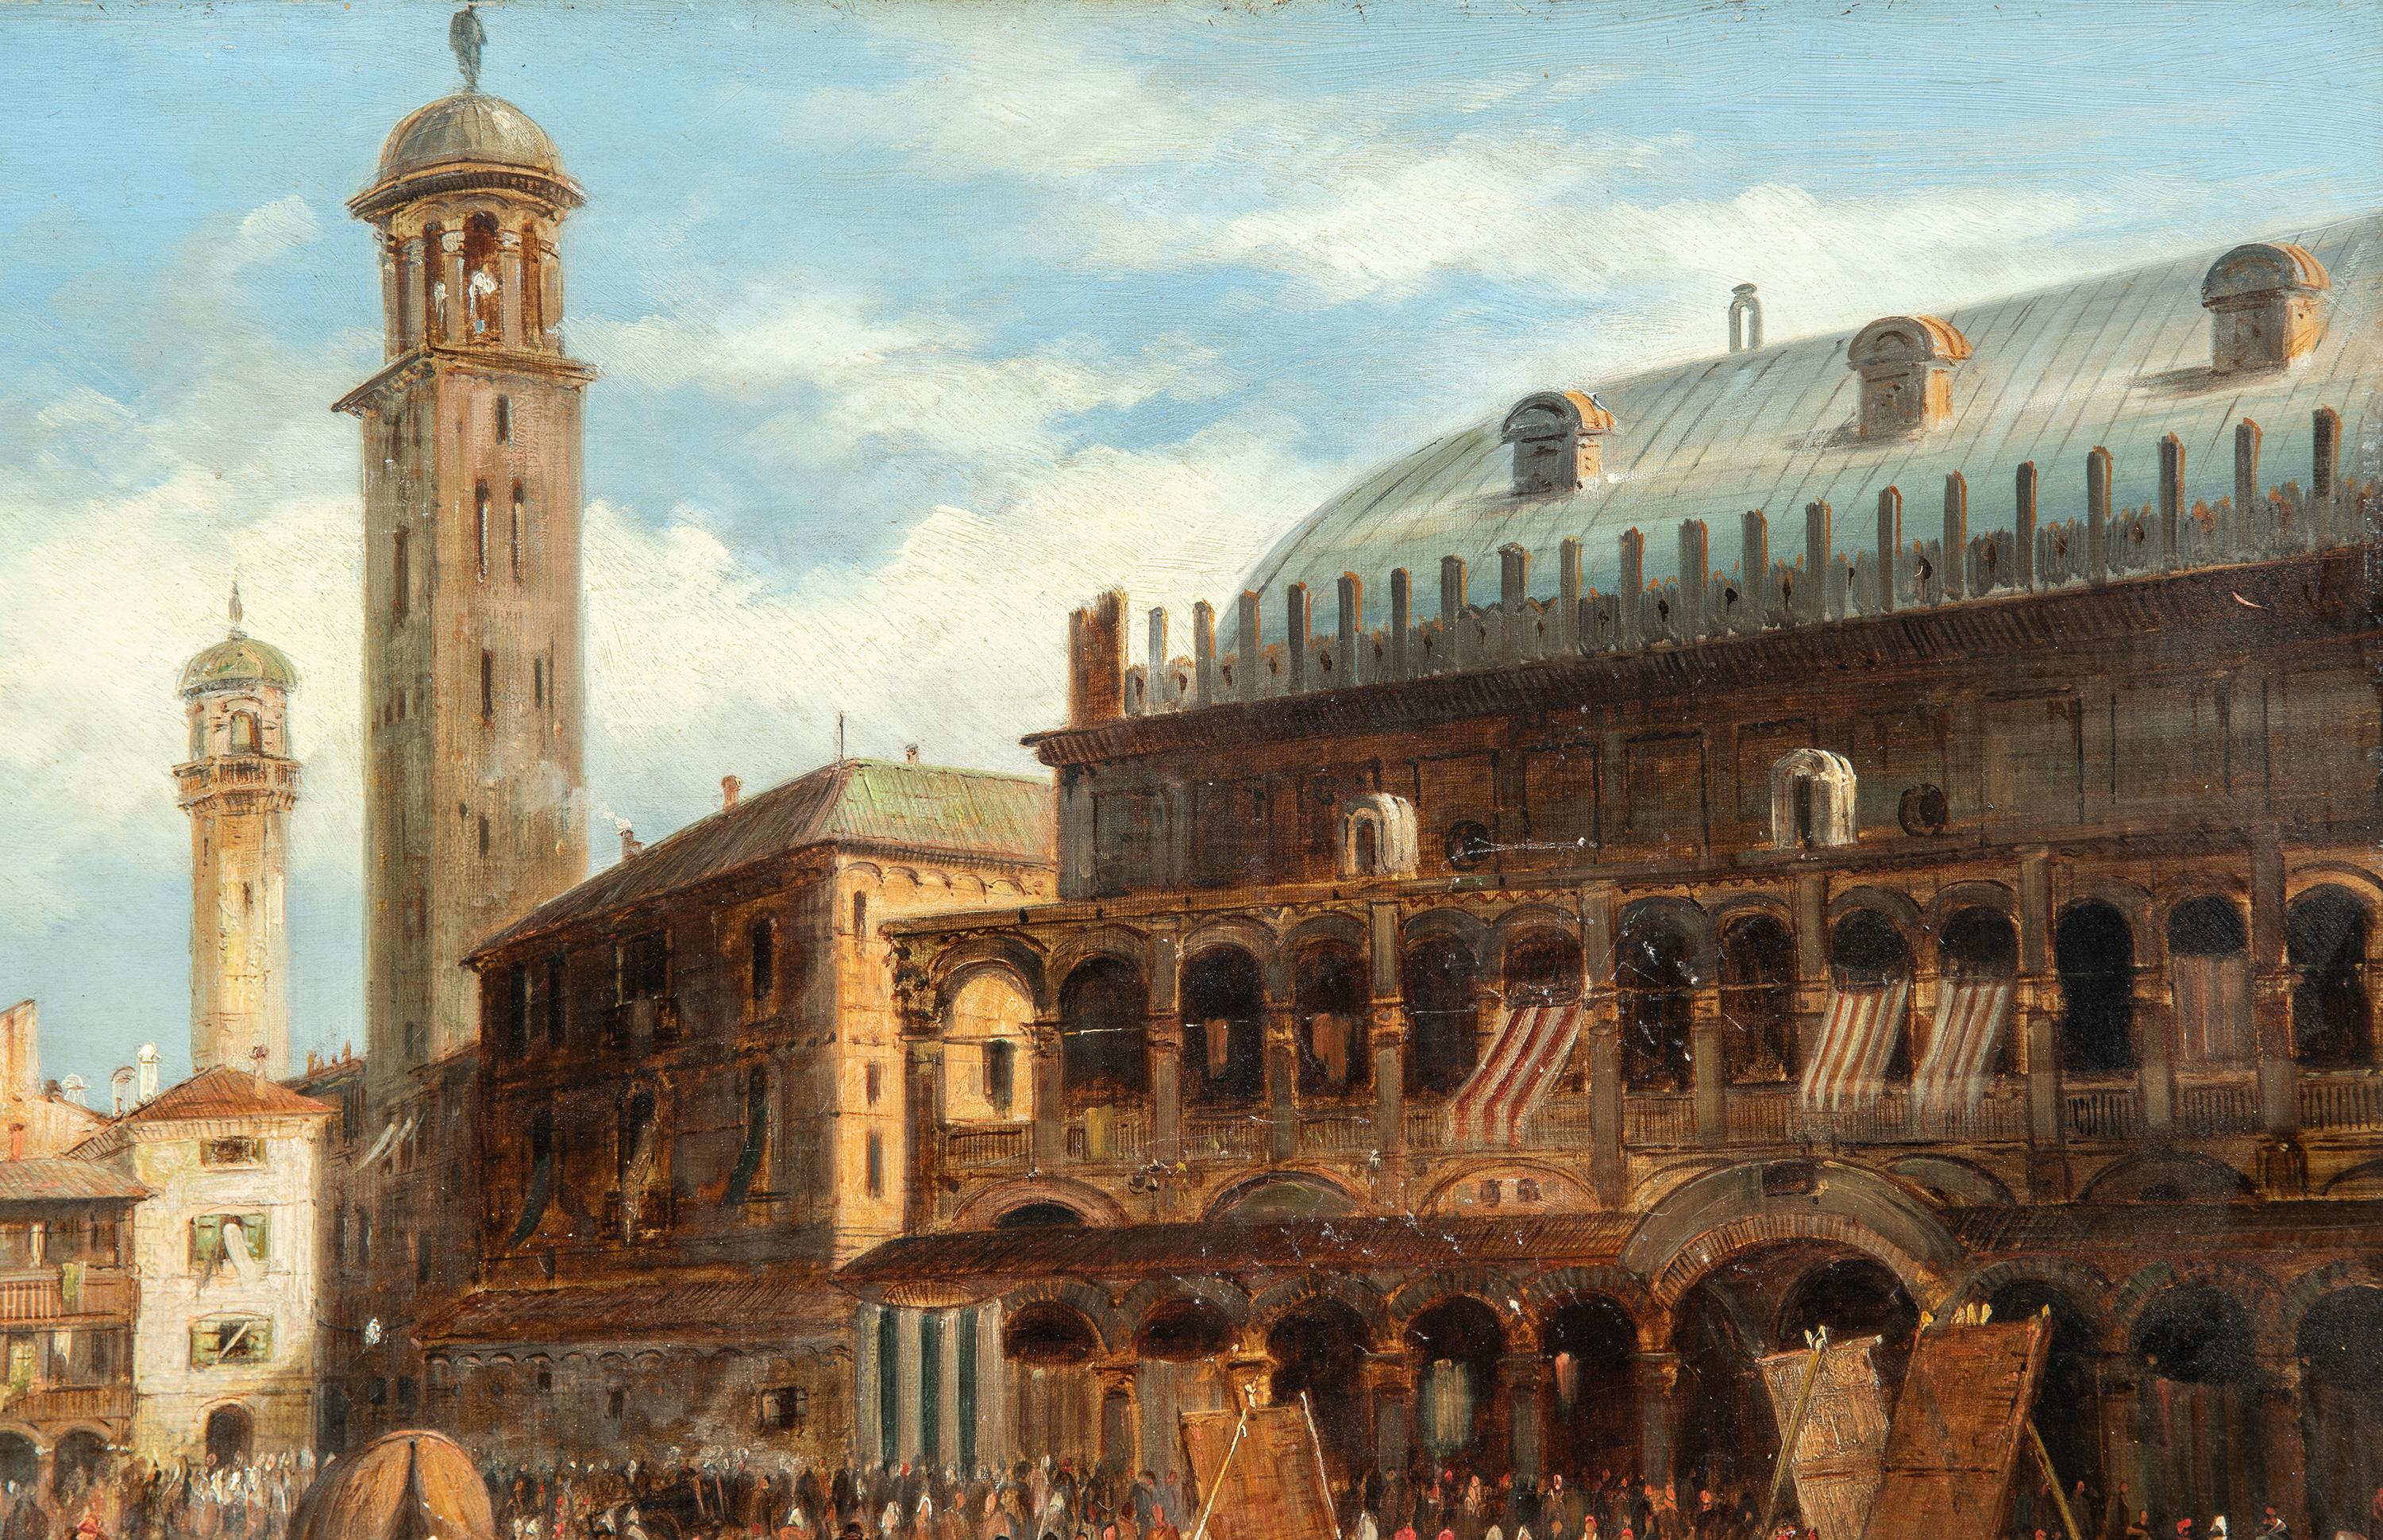 Alfred Pollentine (1836 - 1890) - Padua, Piazza della Frutta.

36 x 62 cm.

Antique oil painting on canvas, without frame.

- Work signed bottom right: “A. Pollentine